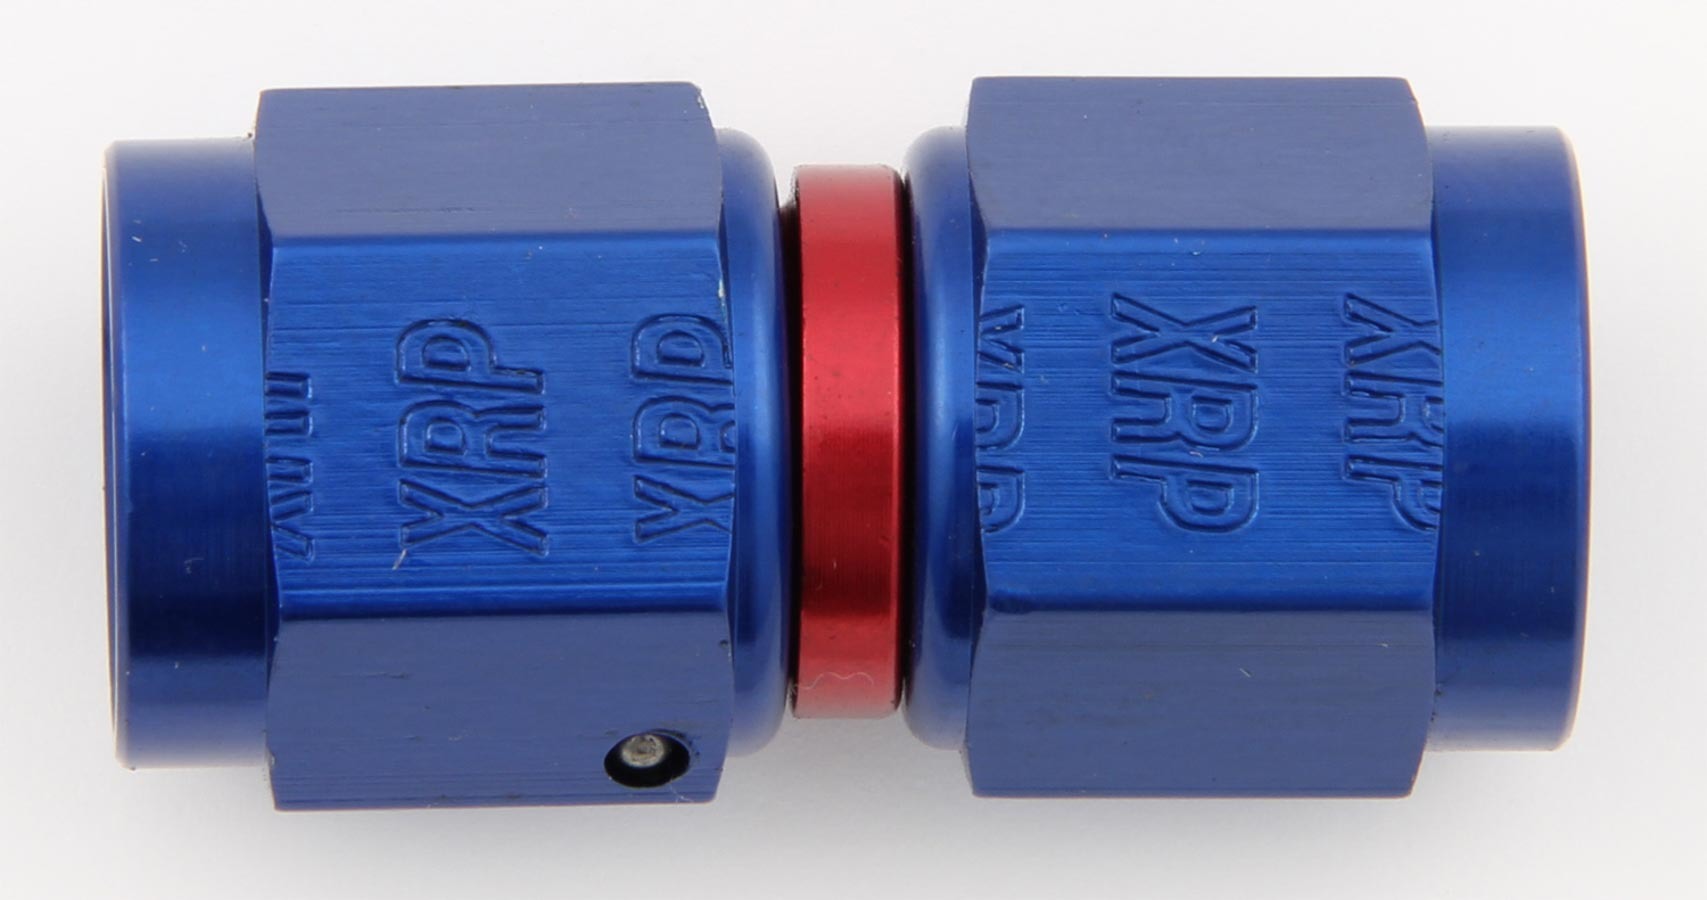 XRP 900104 Fitting, Adapter, Straight, 4 AN Female Swivel to 4 AN Female Swivel, Aluminum, Blue / Red Anodized, Each